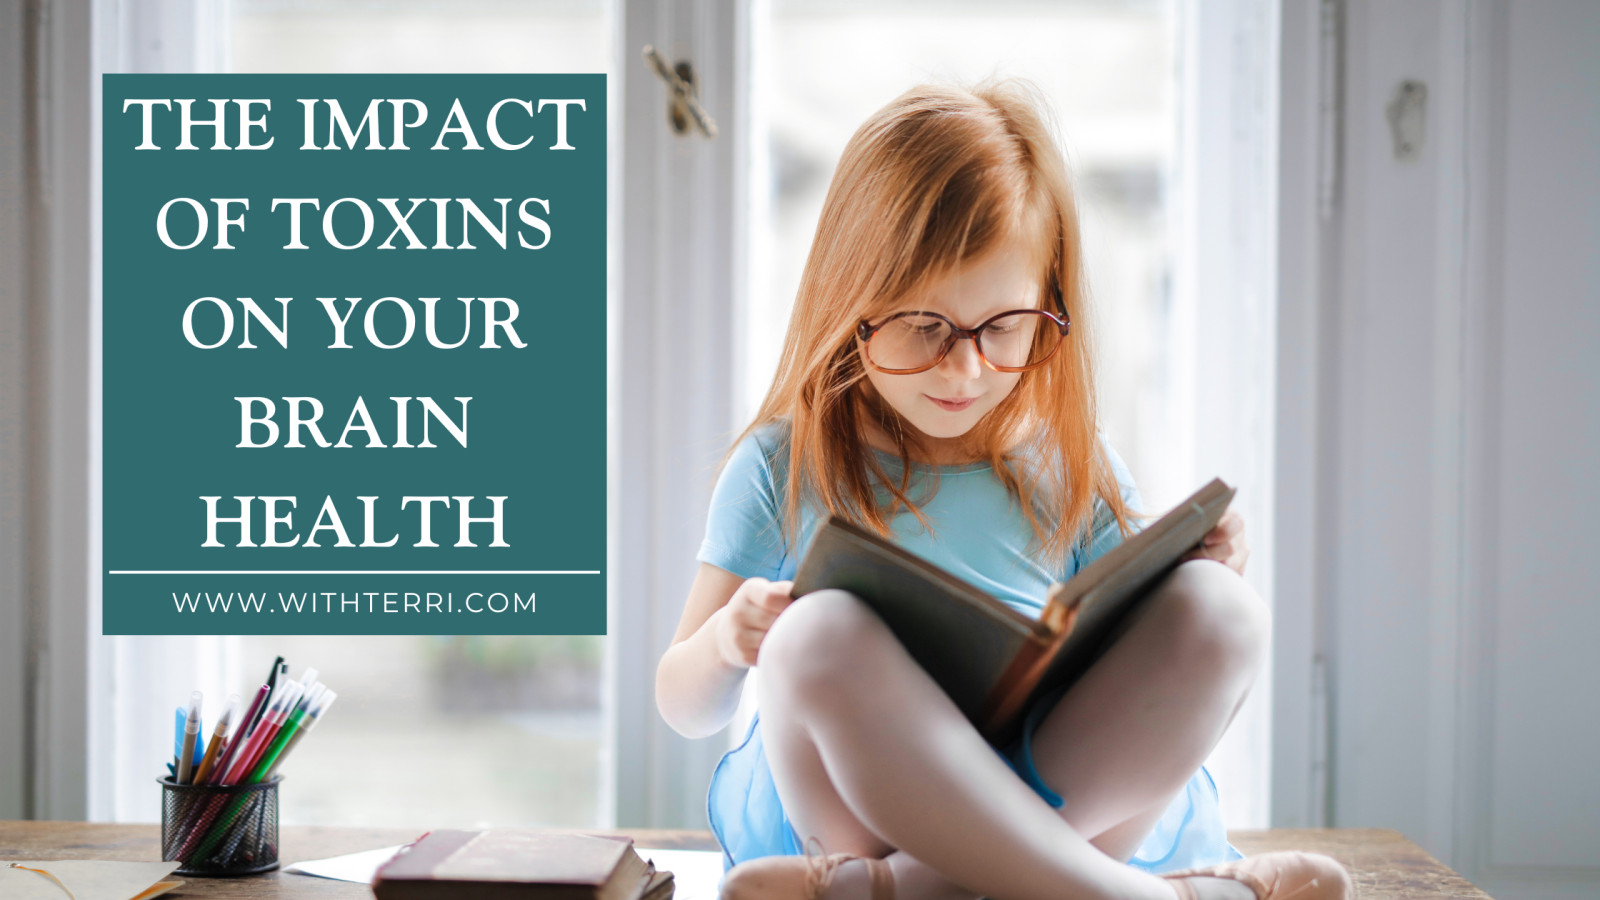 The Impact of Toxins on Your Brain Health